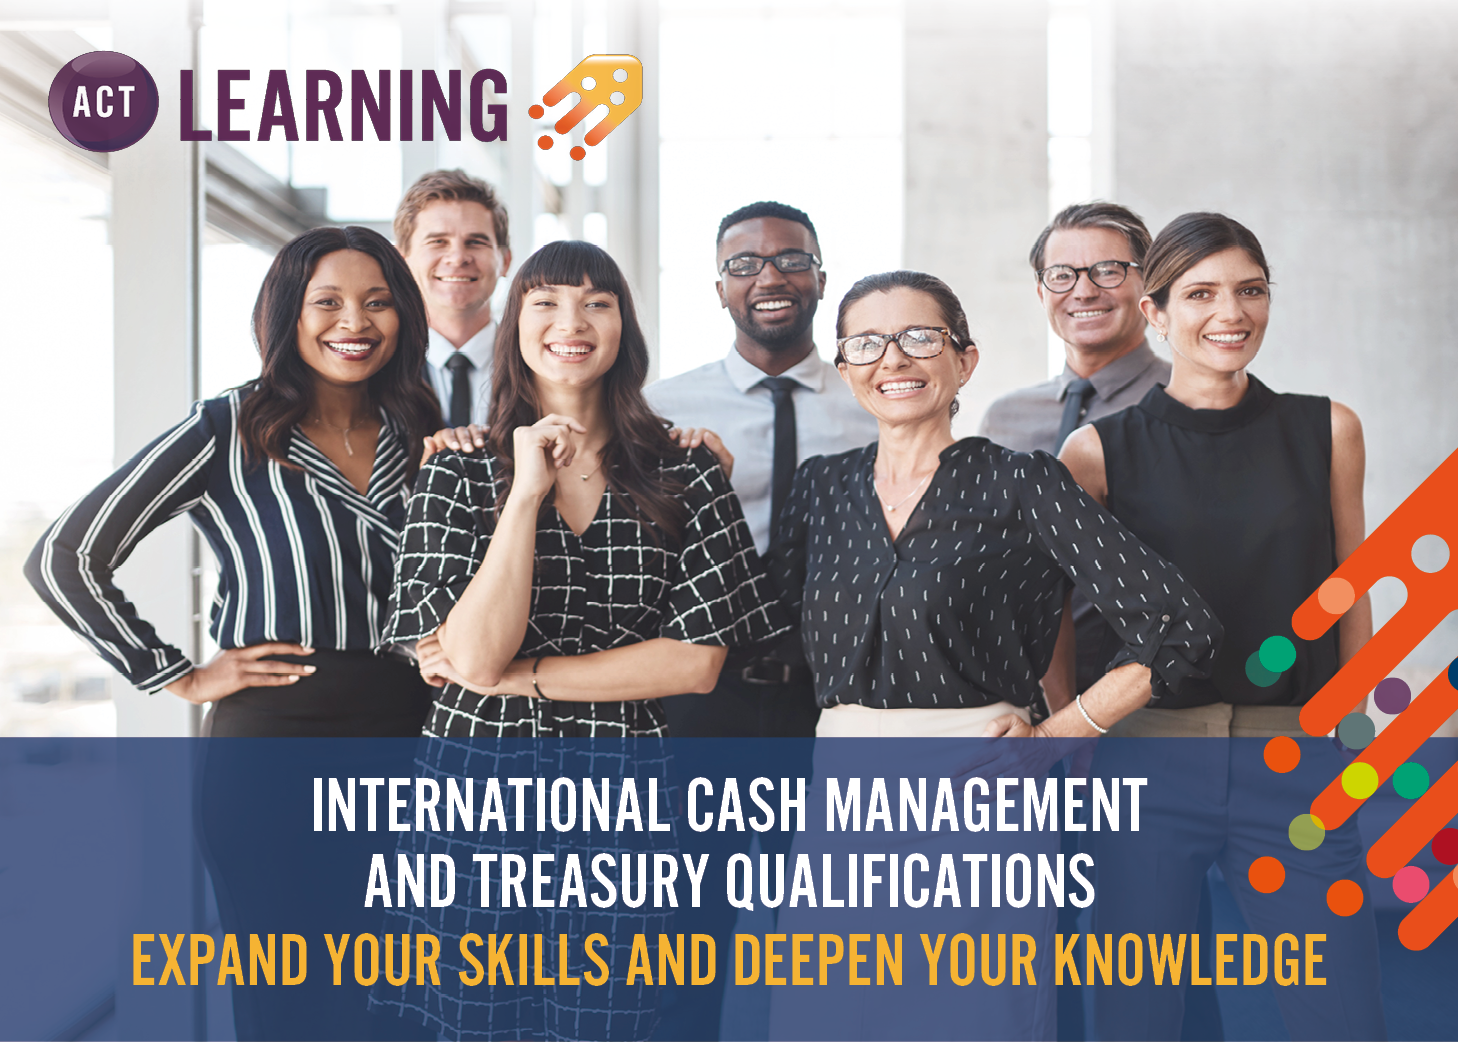 Test reads: INTERNATIONAL CASH MANAGEMENT  AND TREASURY QUALIFICATIONS: EXPAND YOUR SKILLS AND DEEPEN YOUR KNOWLEDGE